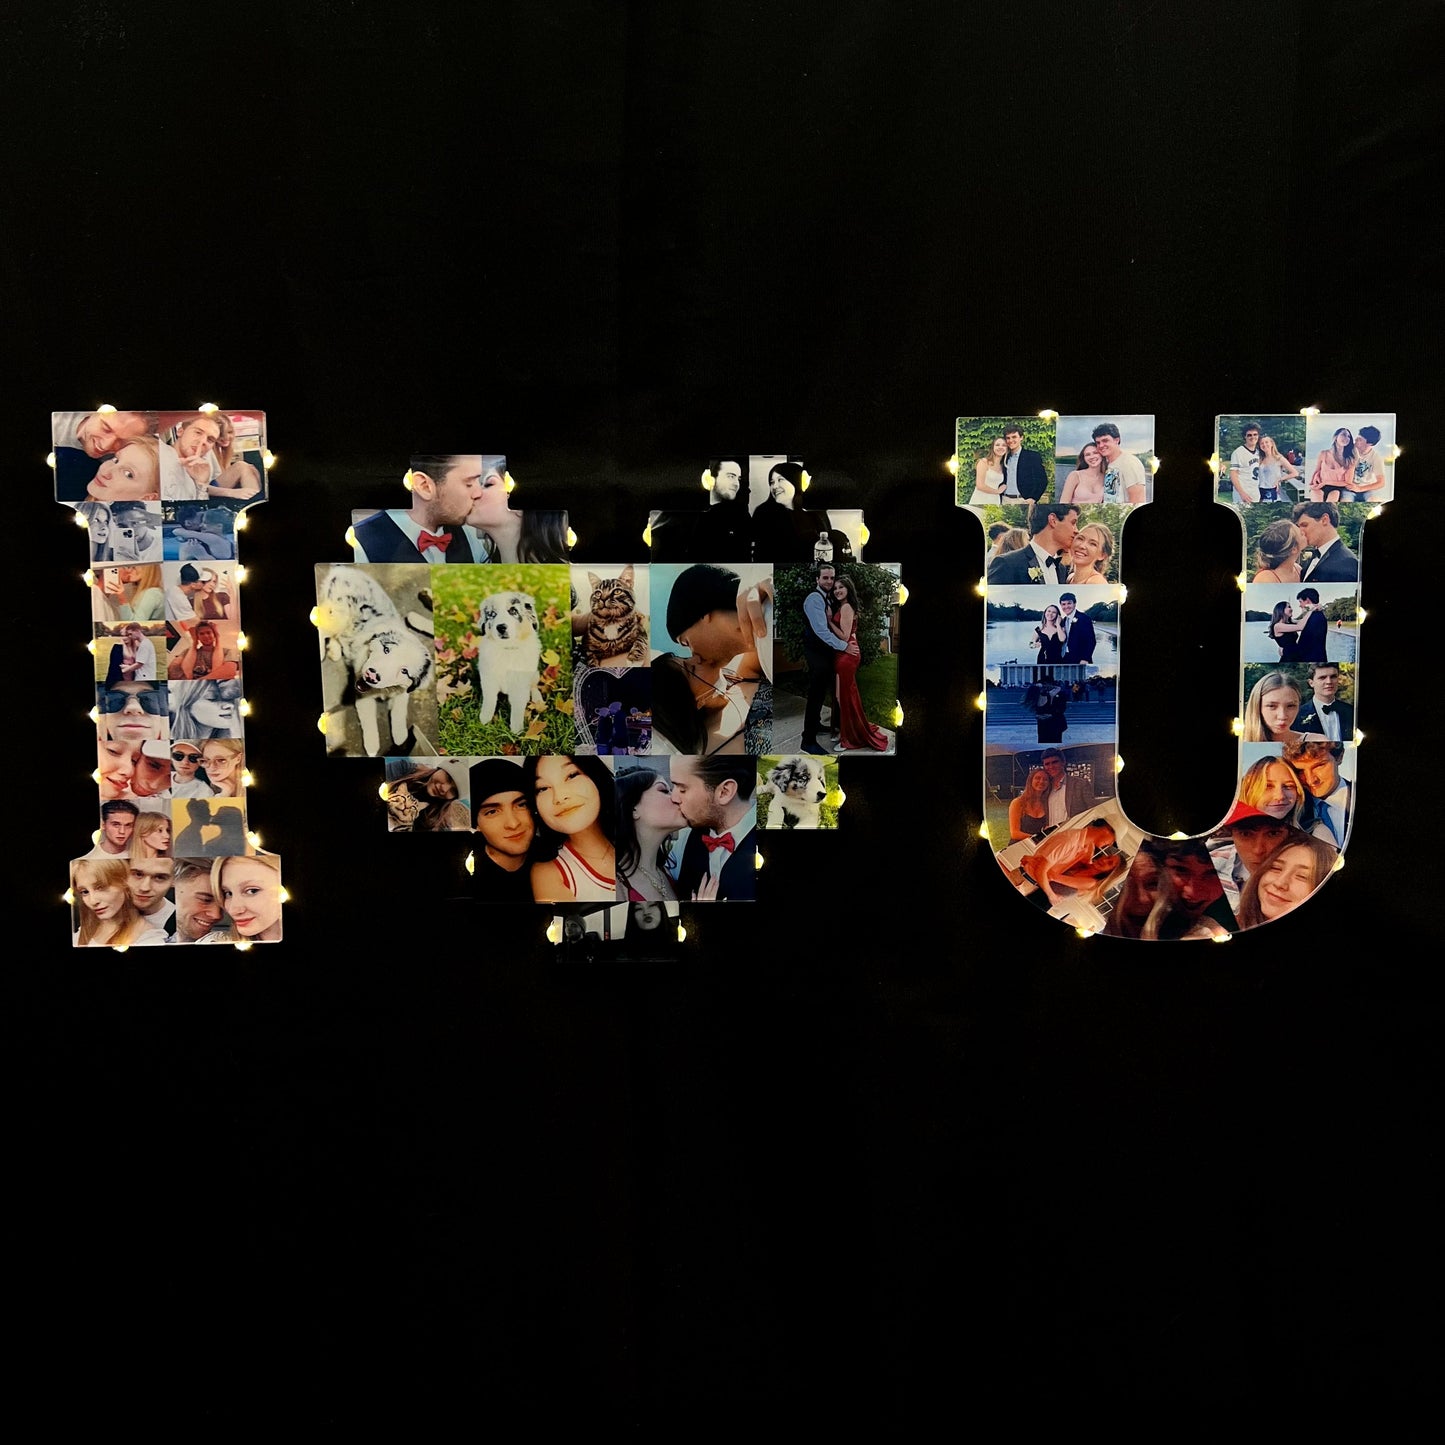 Custom Heart Shape Photo Collage Lamp with Your Photos❤